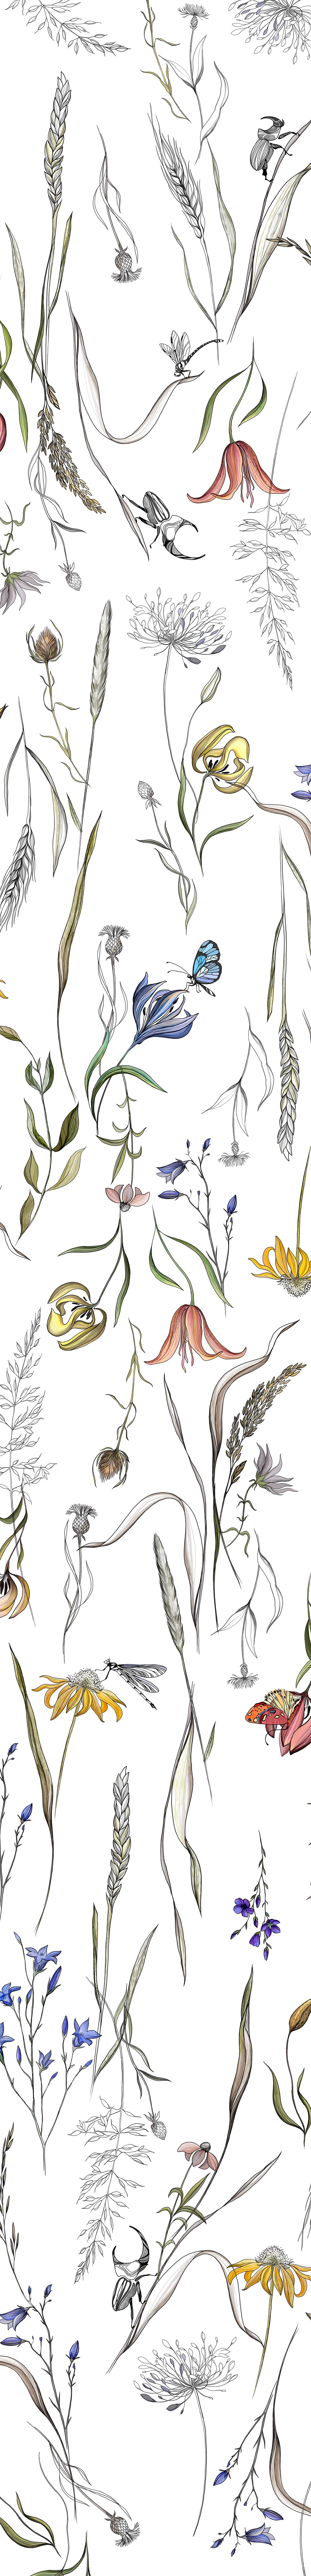 The pattern for textile with different wildflowers and insects.